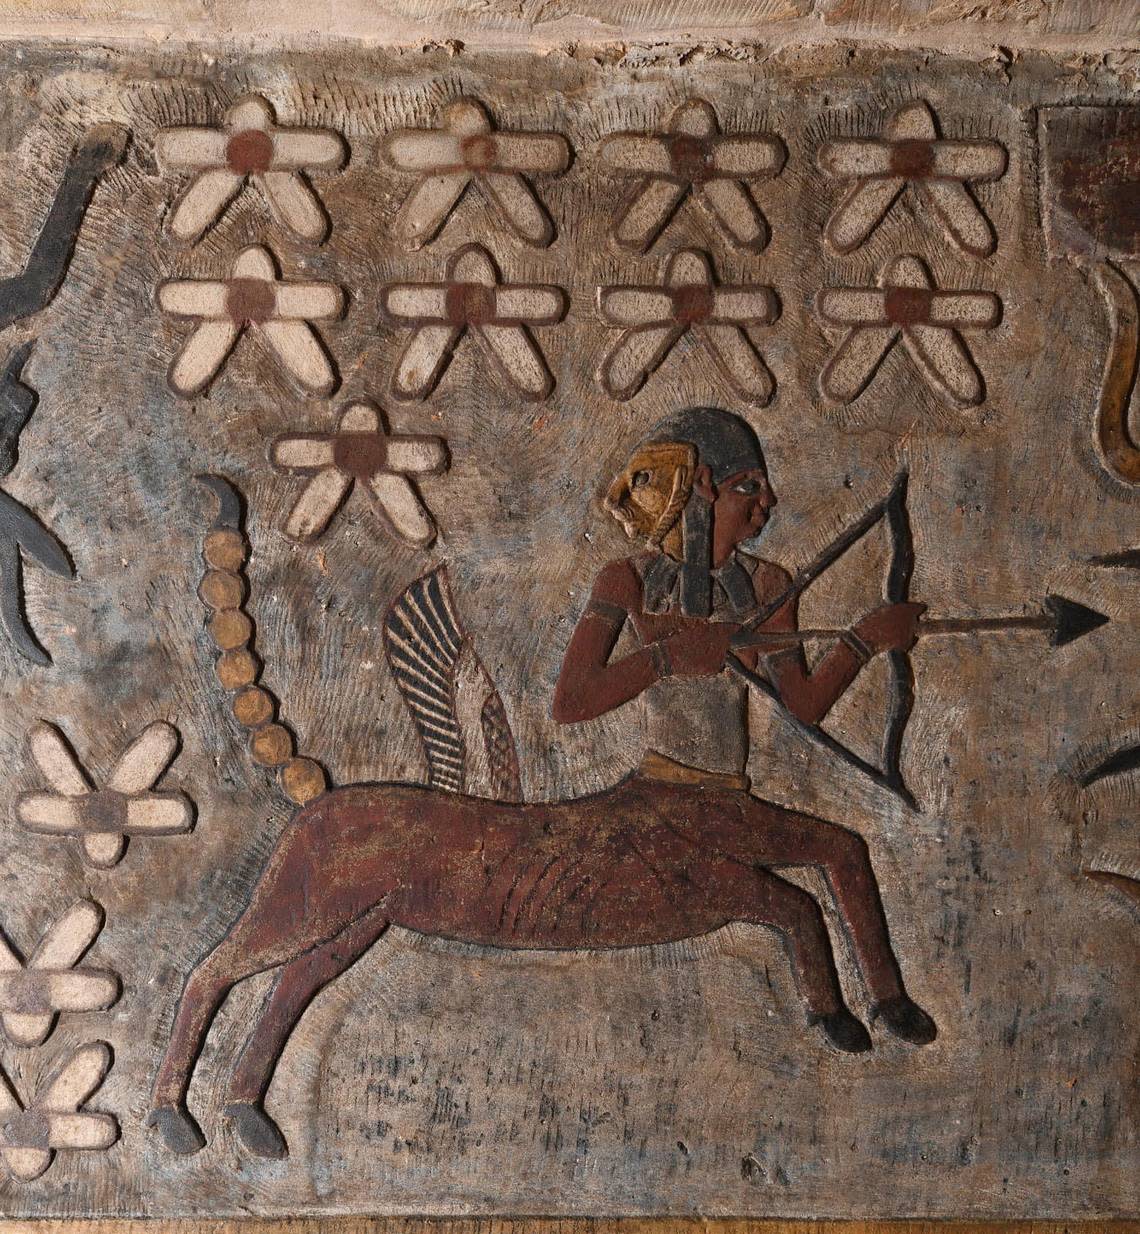 A centaur-like figure, representing the Sagittarius sign, found at the temple. Photo from Egypt's Ministry of Tourism and Antiquities